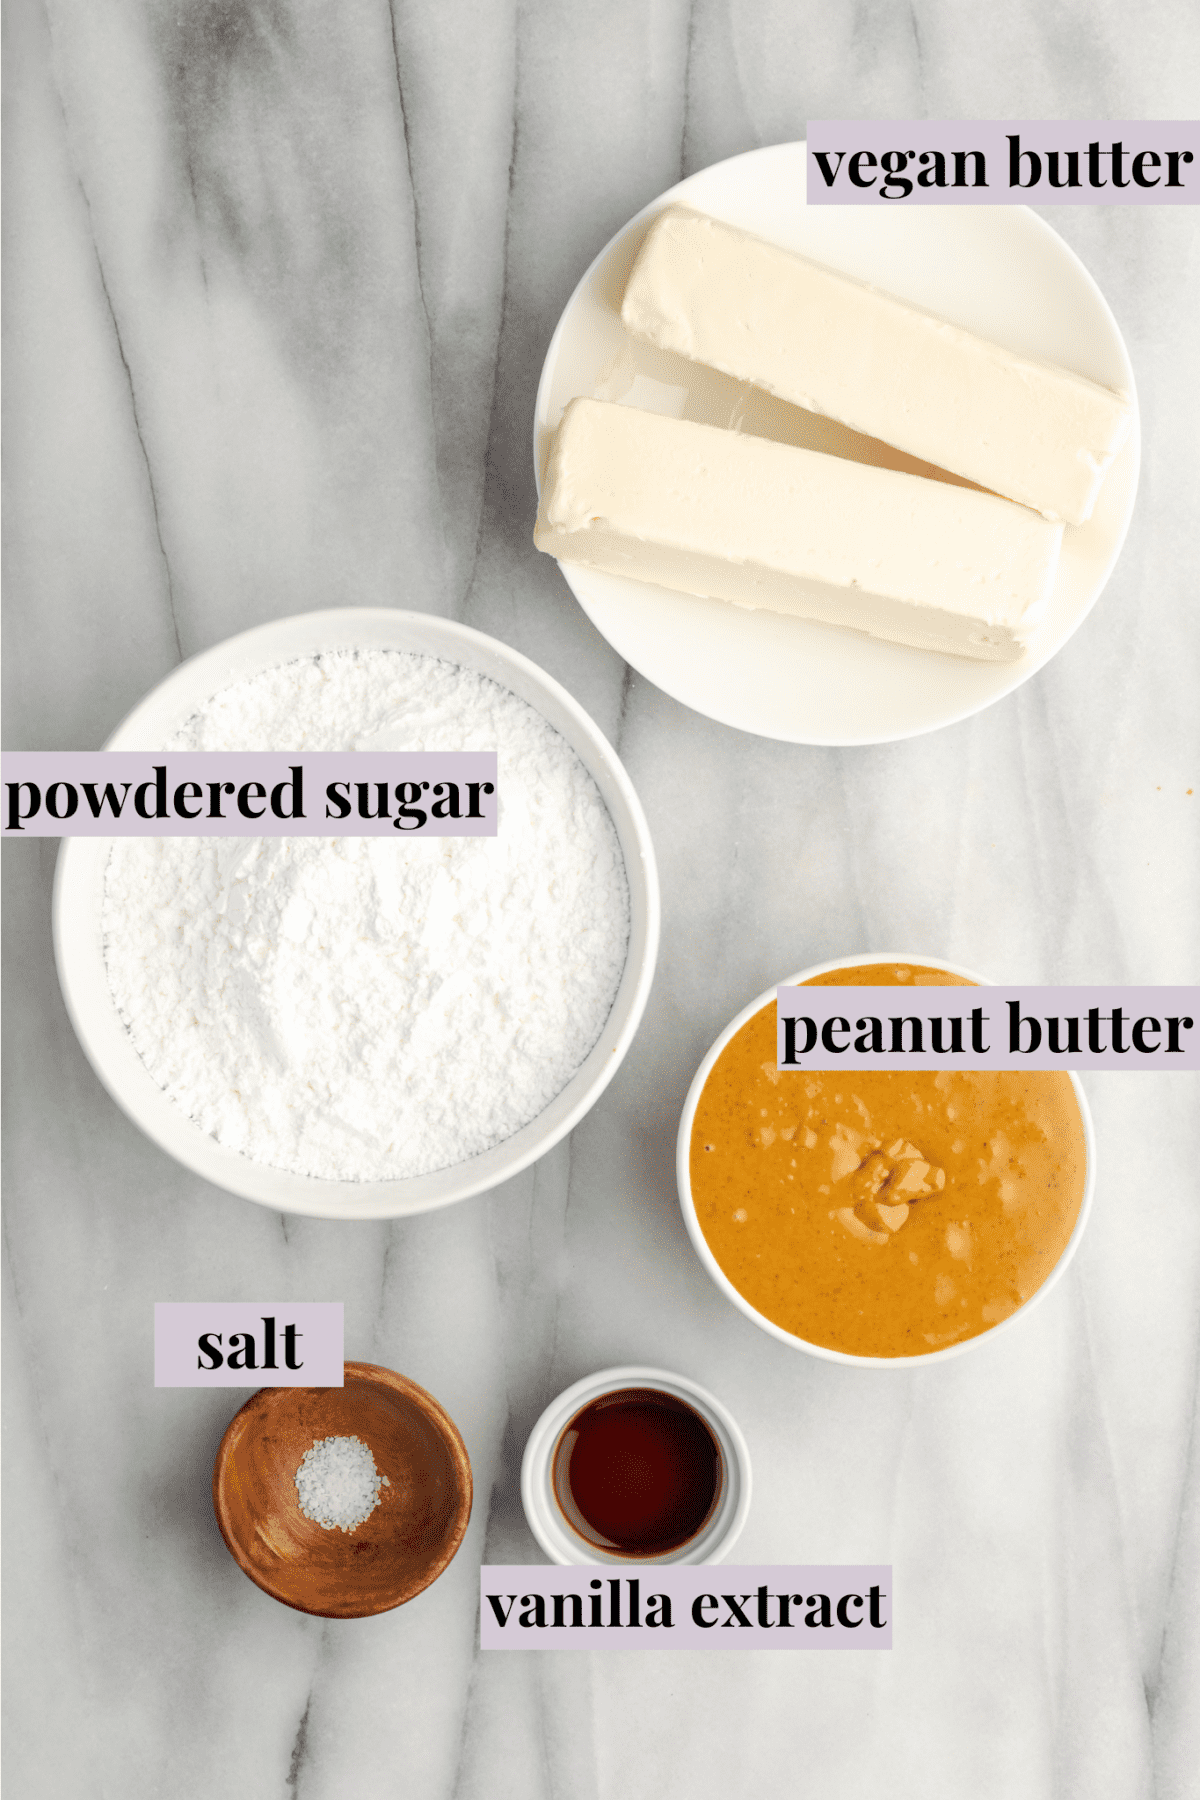 Overview of the peanut butter cake ingredients